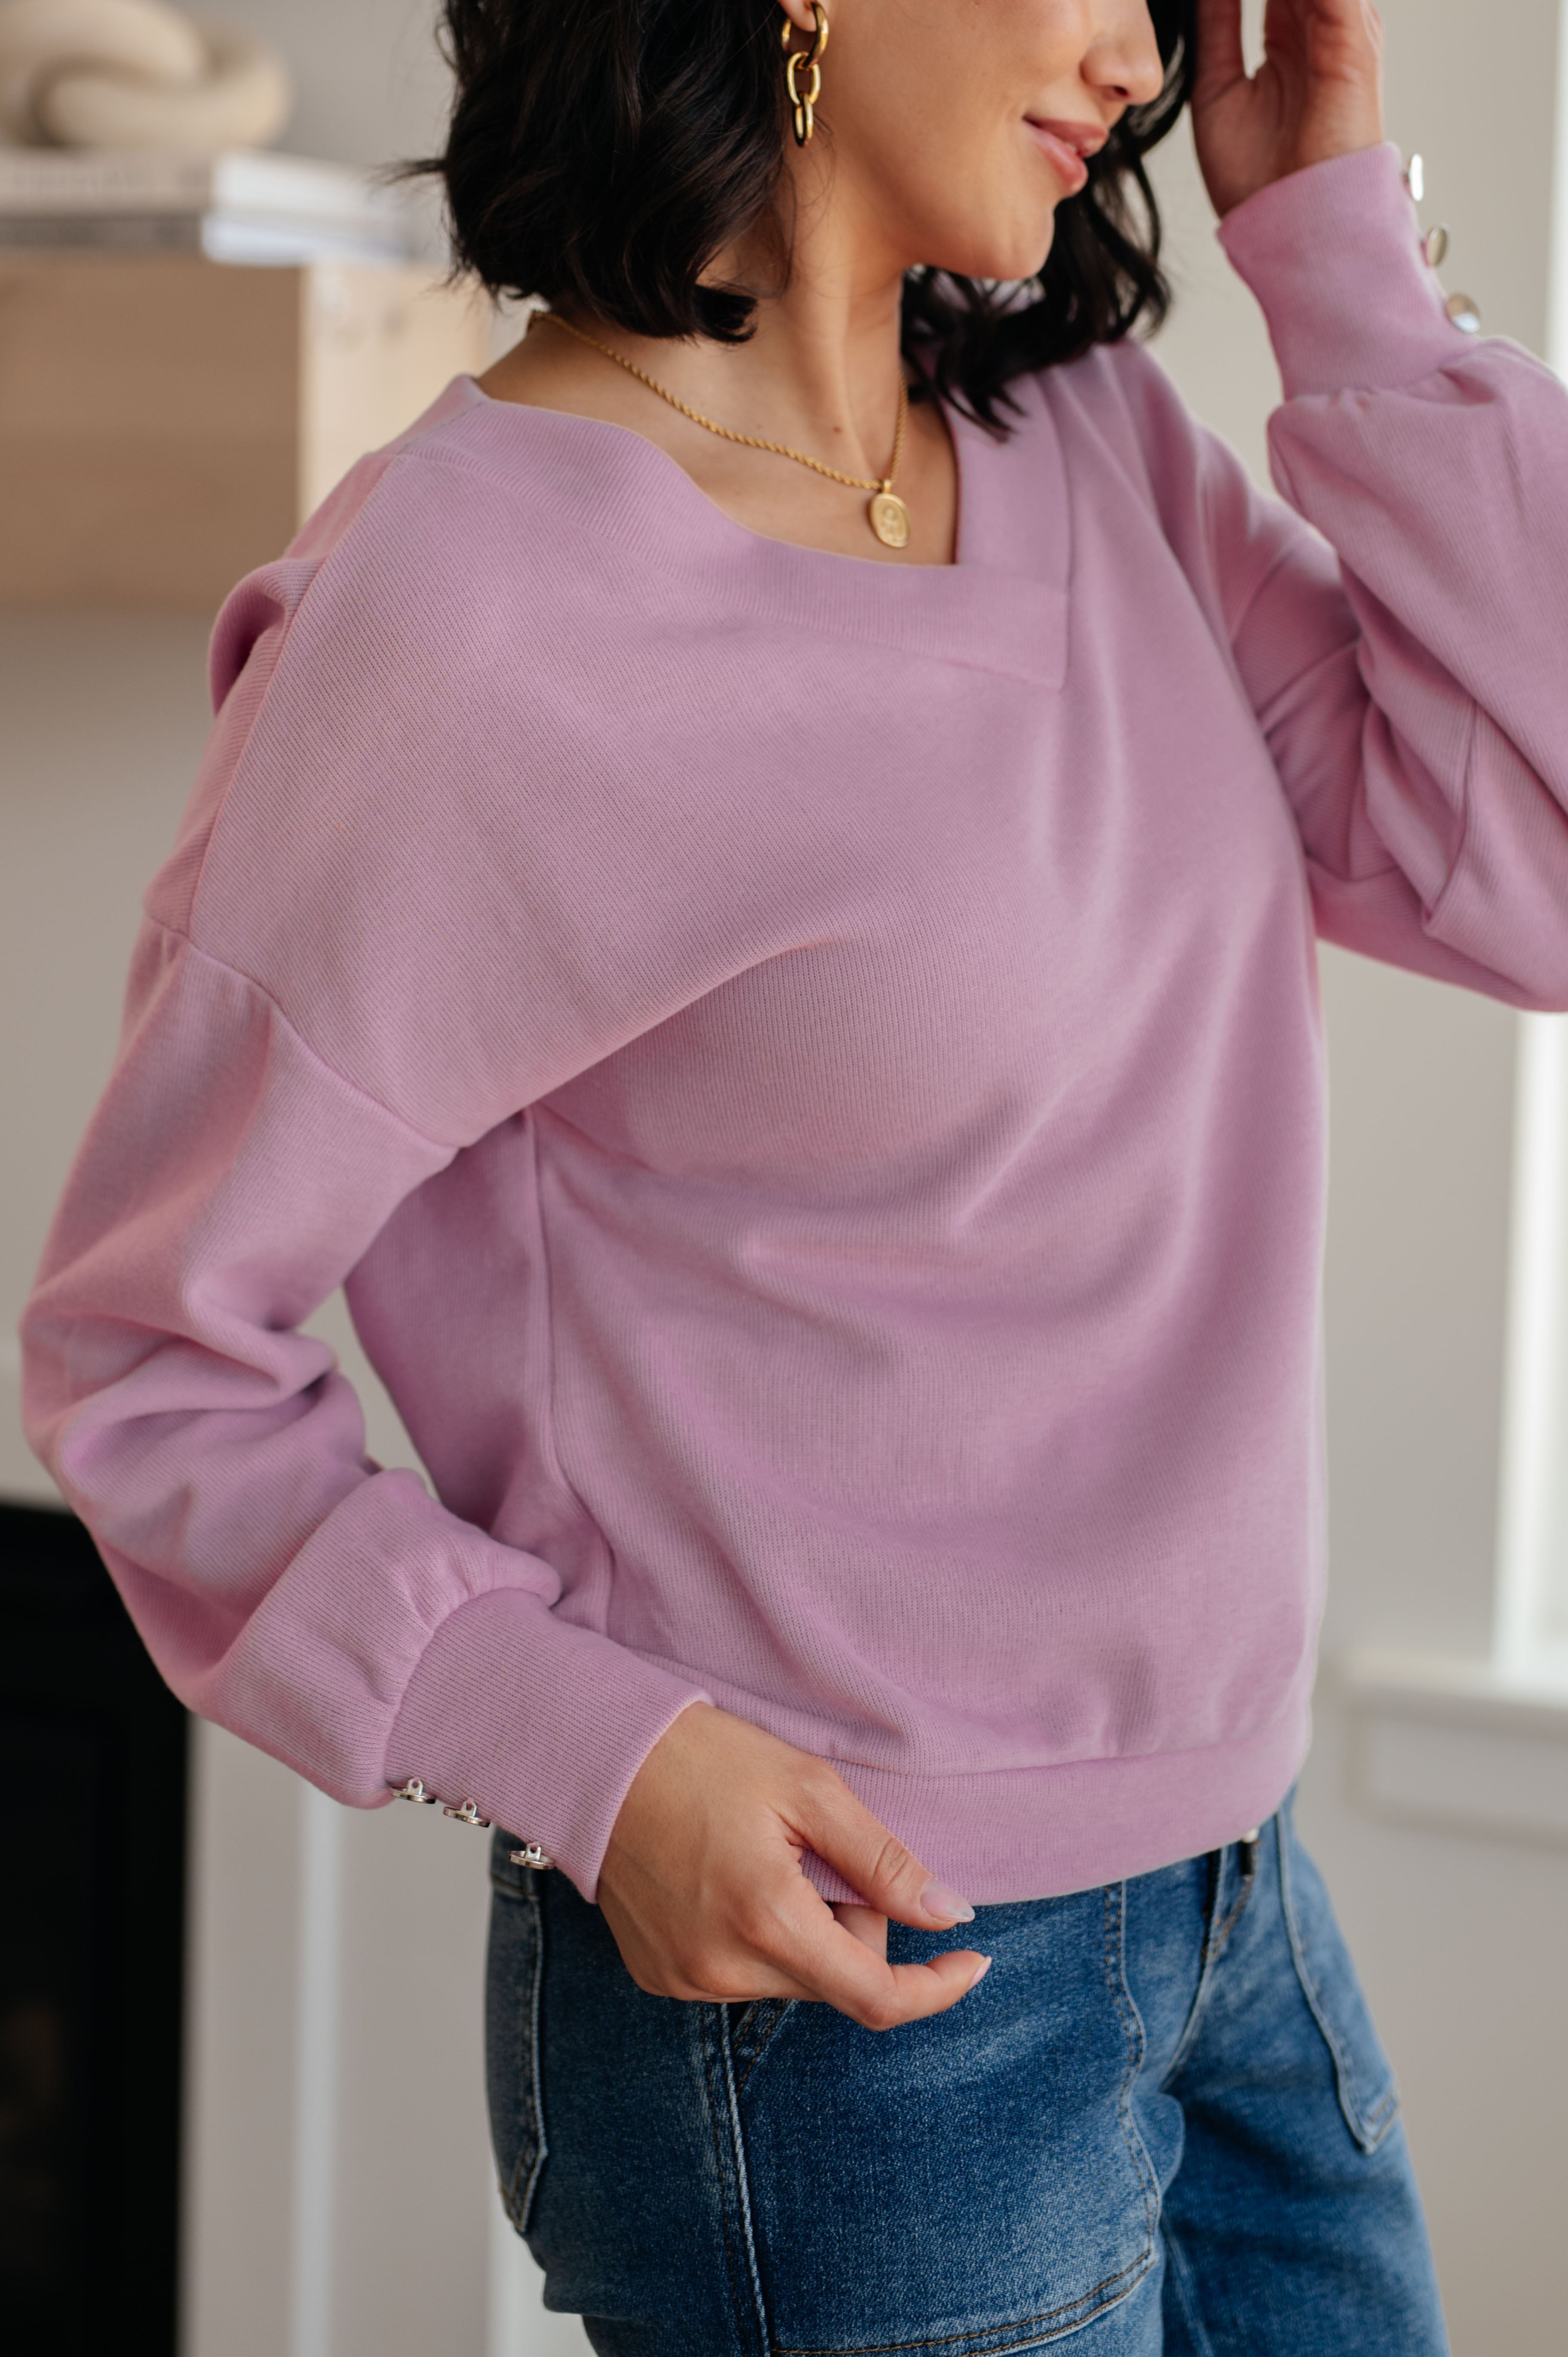 Totally Verified Long Sleeve V-Neck Top (Ships in 1-2 Weeks)